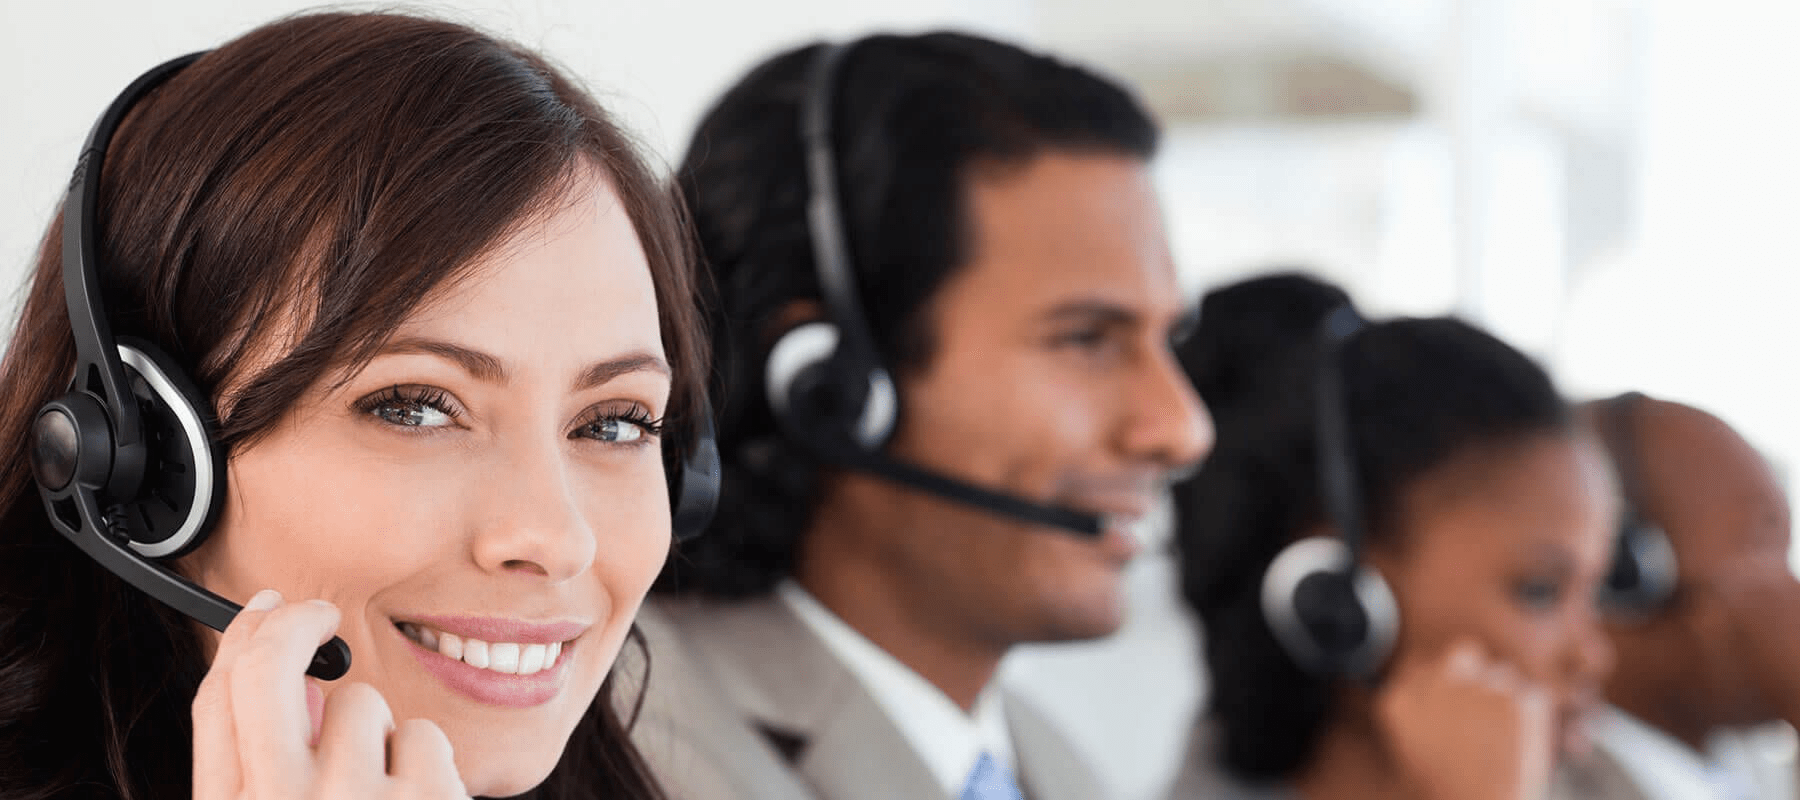 Customer service reps on headsets